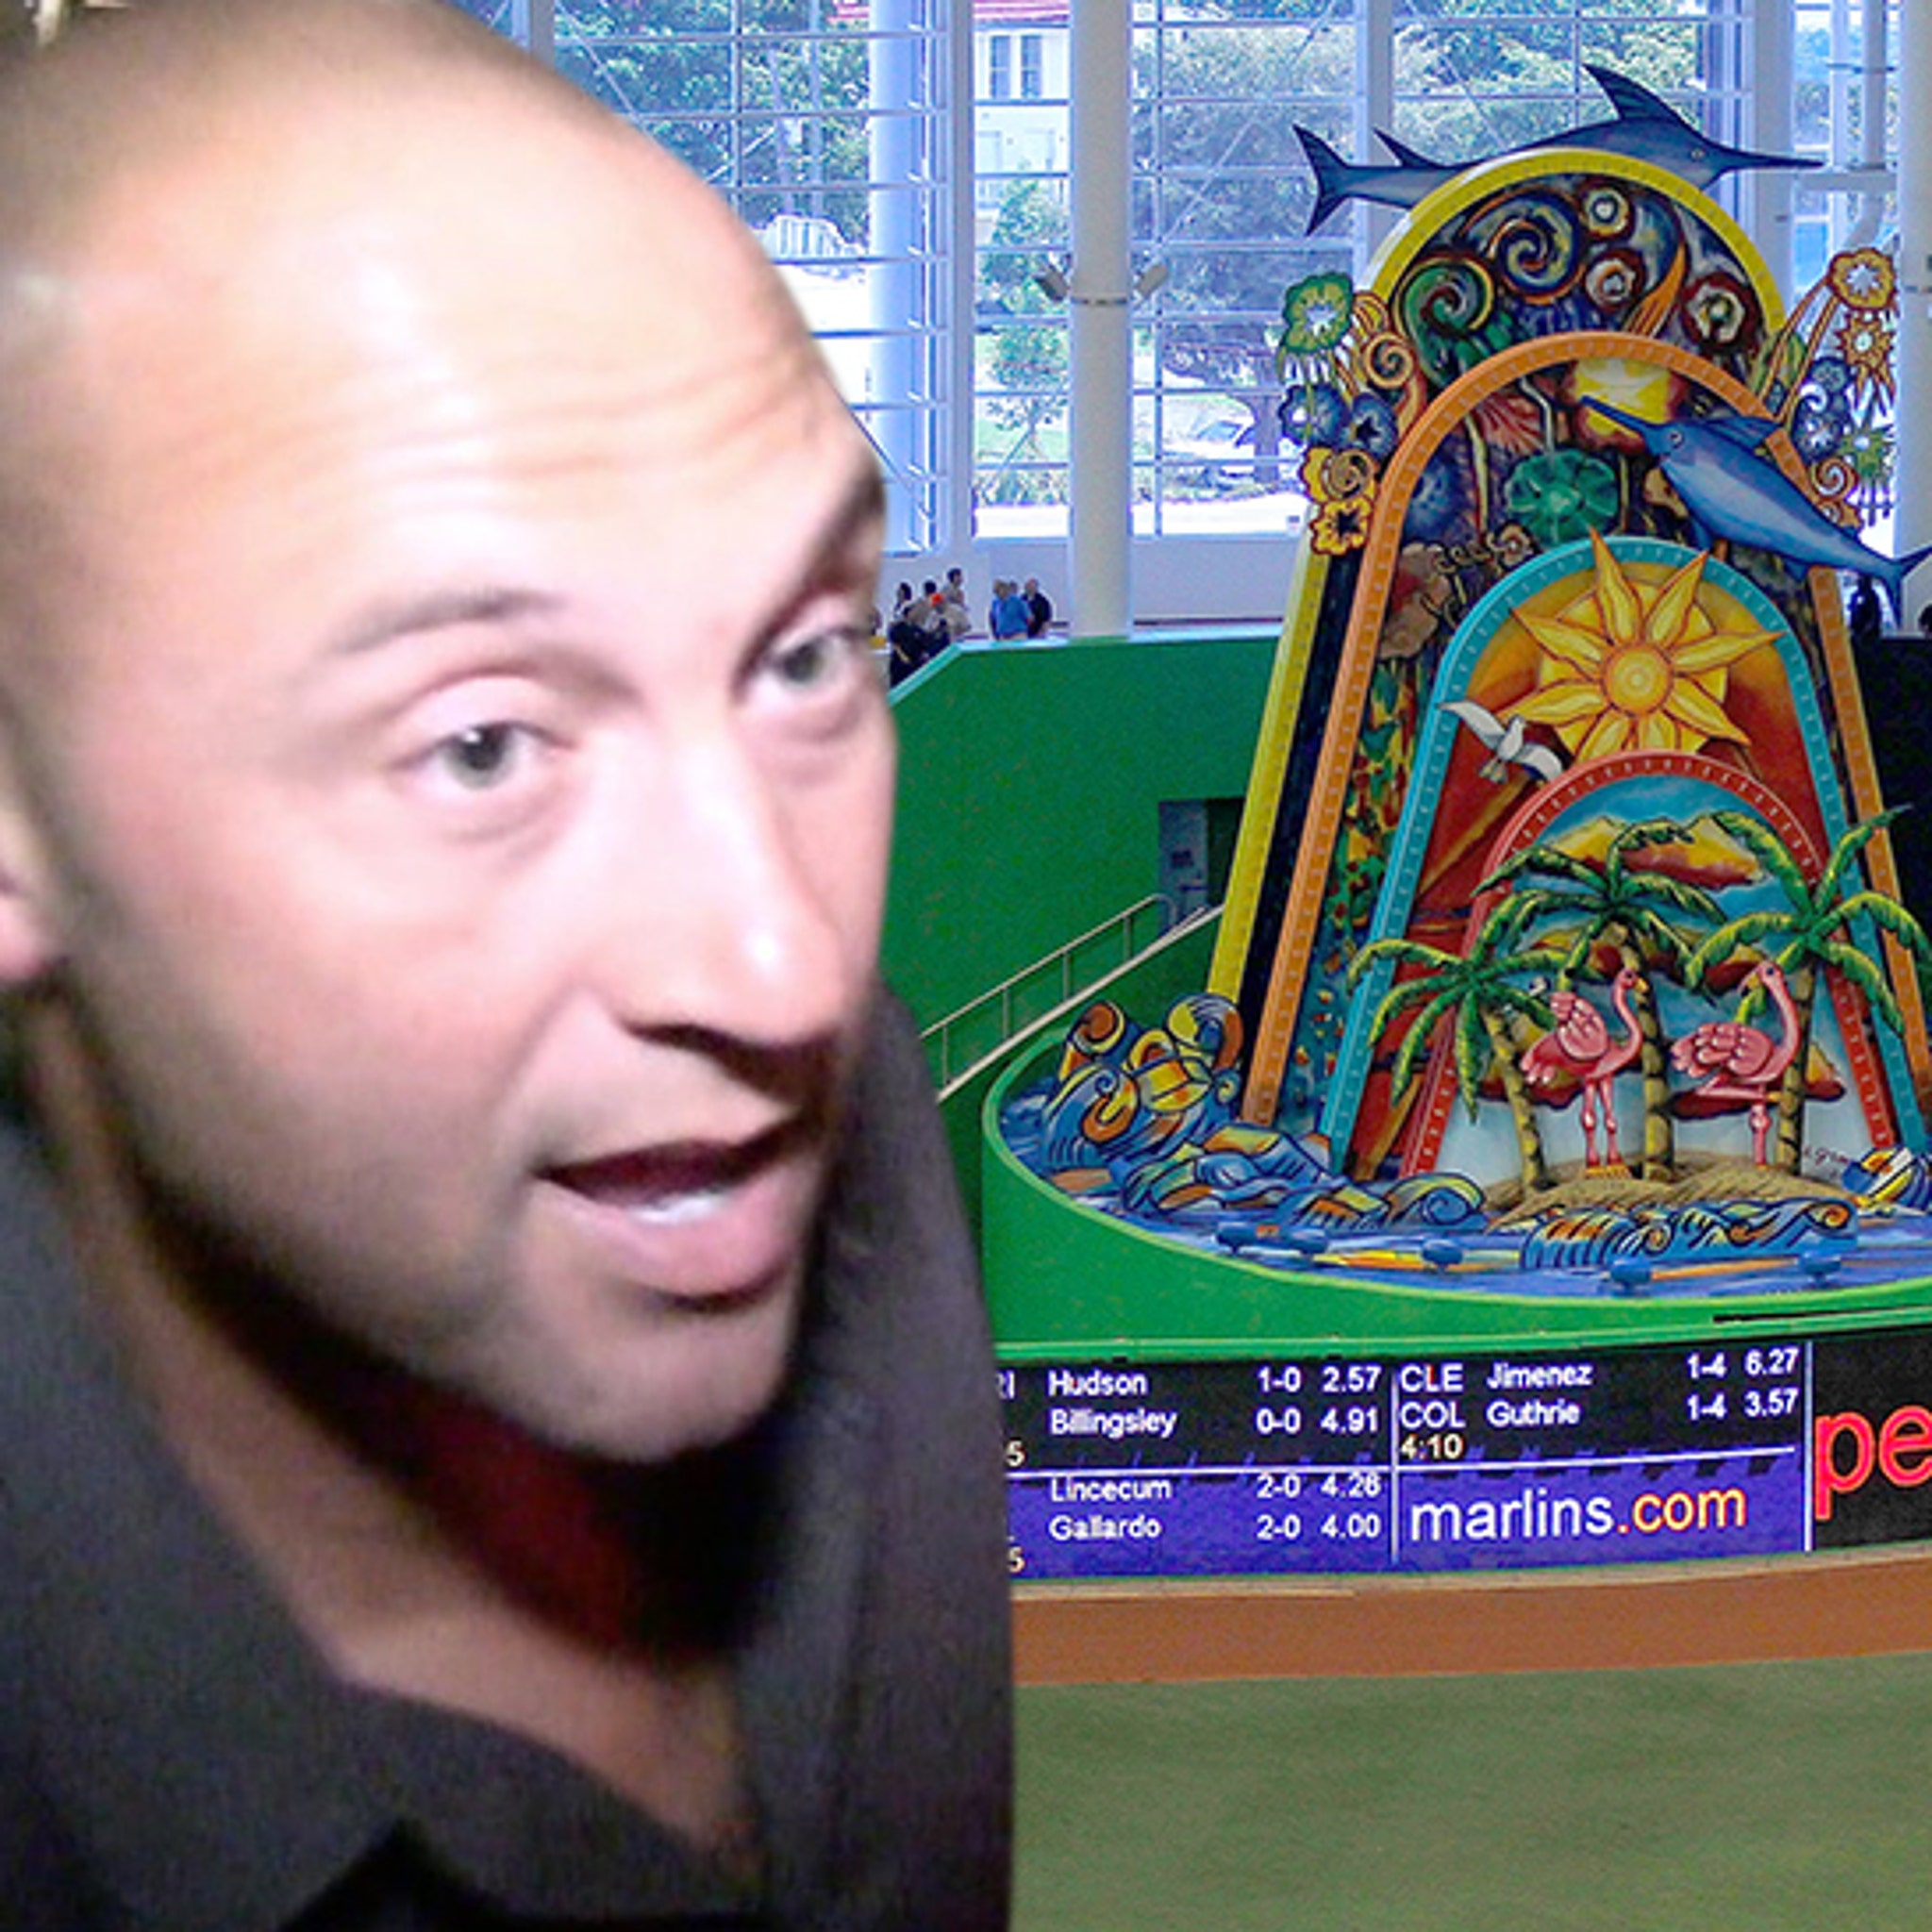 Marlins to relocate home run sculpture